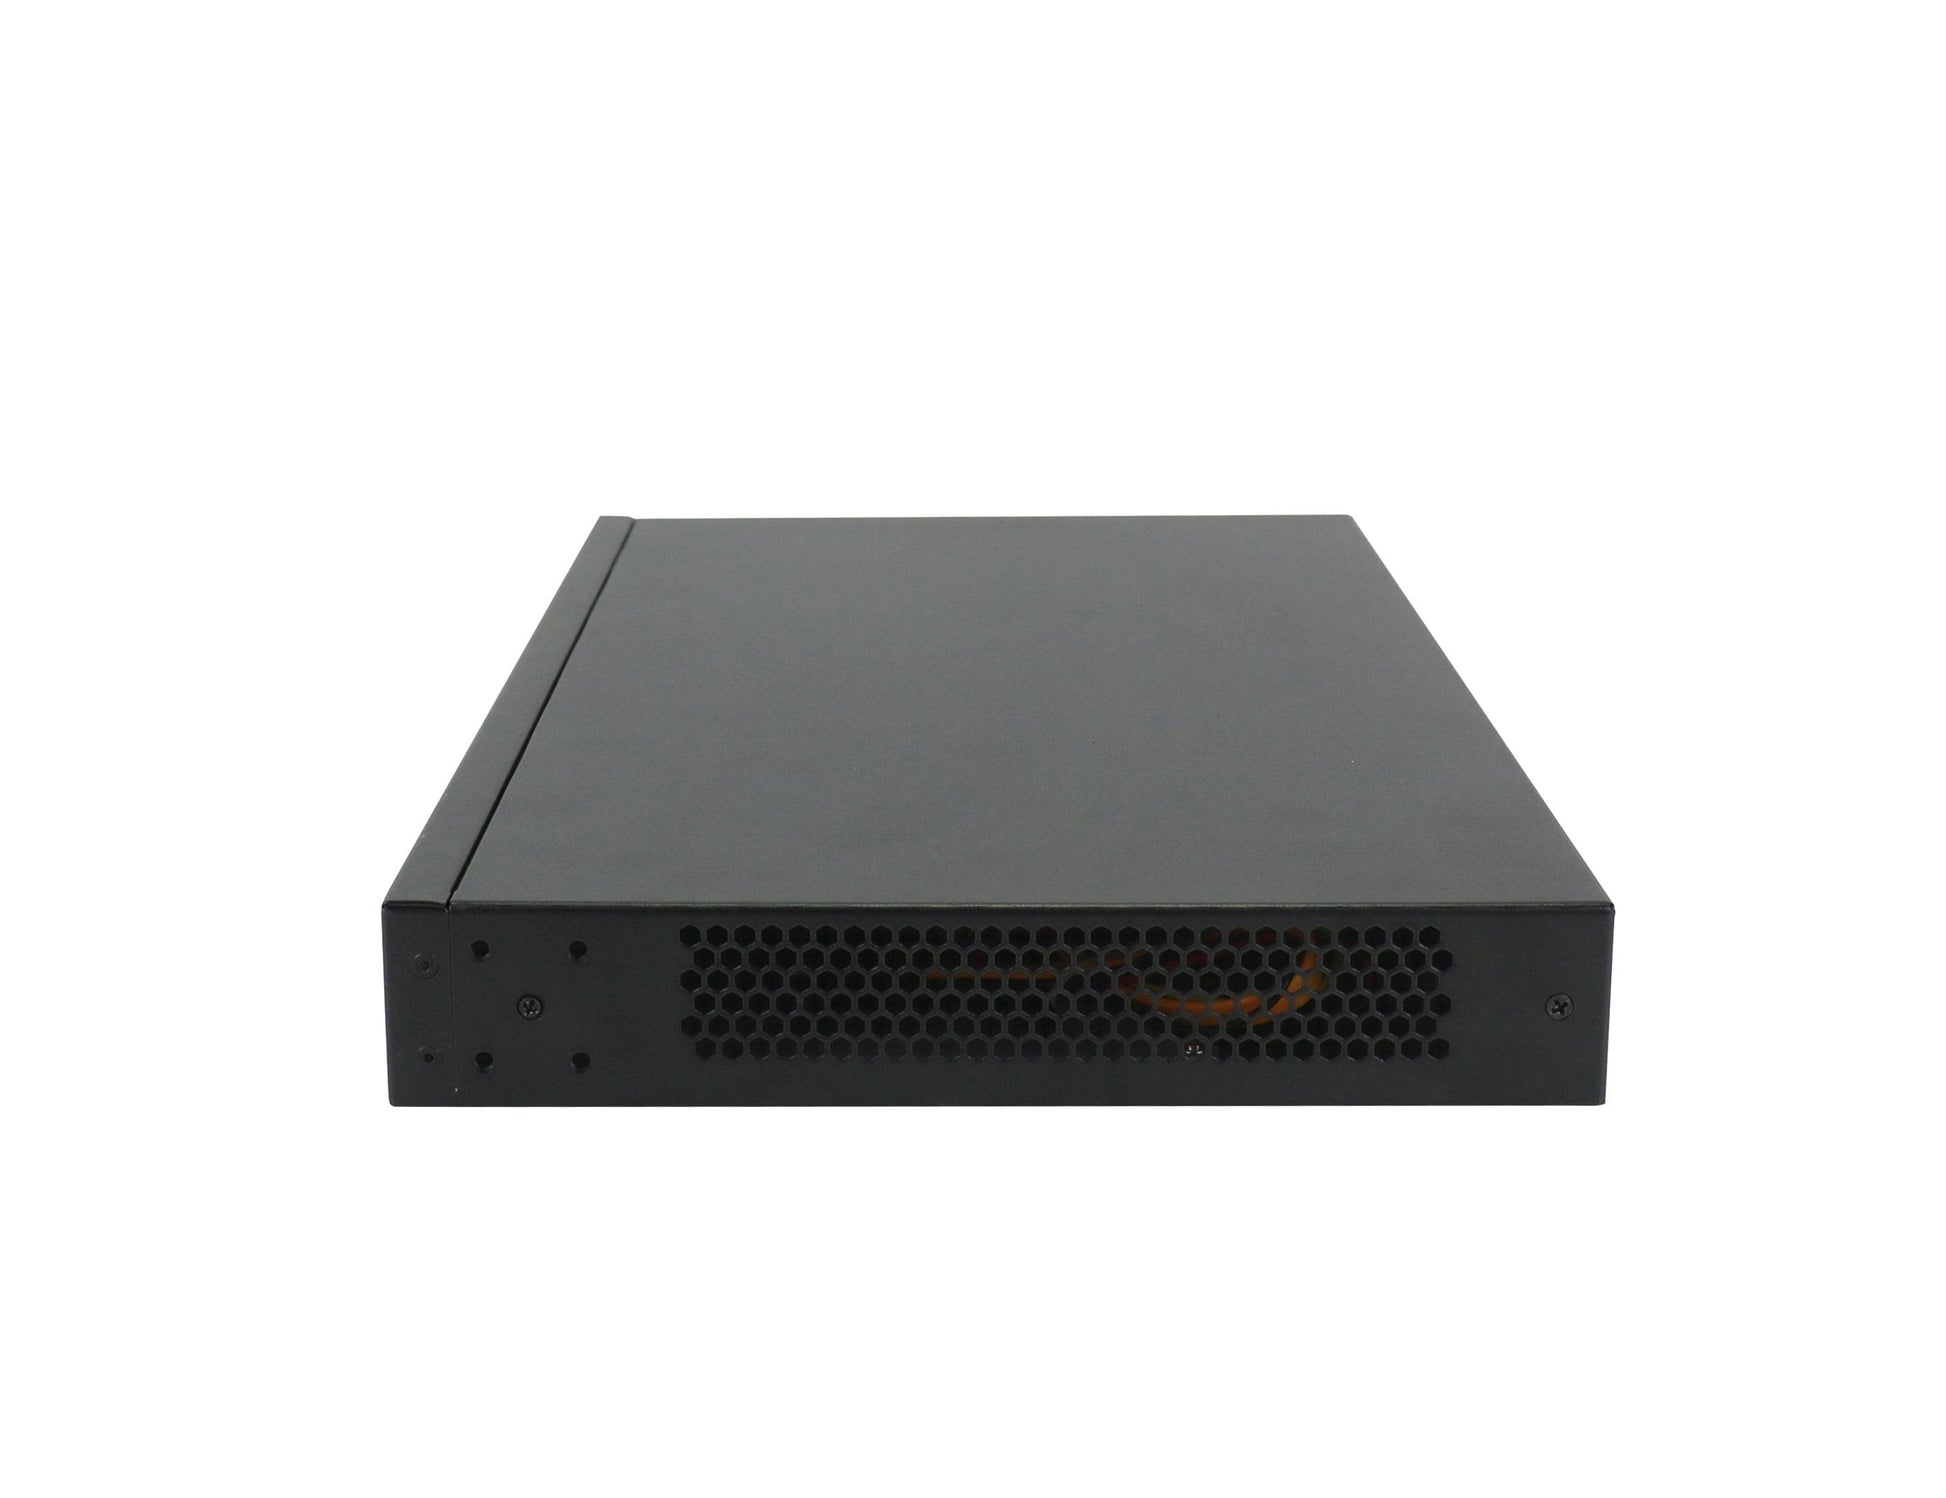 SecPoint Penetrator S9 - 16 IP Concurrent Scan License Vuln Scanning Appliance (3 Years License) - SecPoint